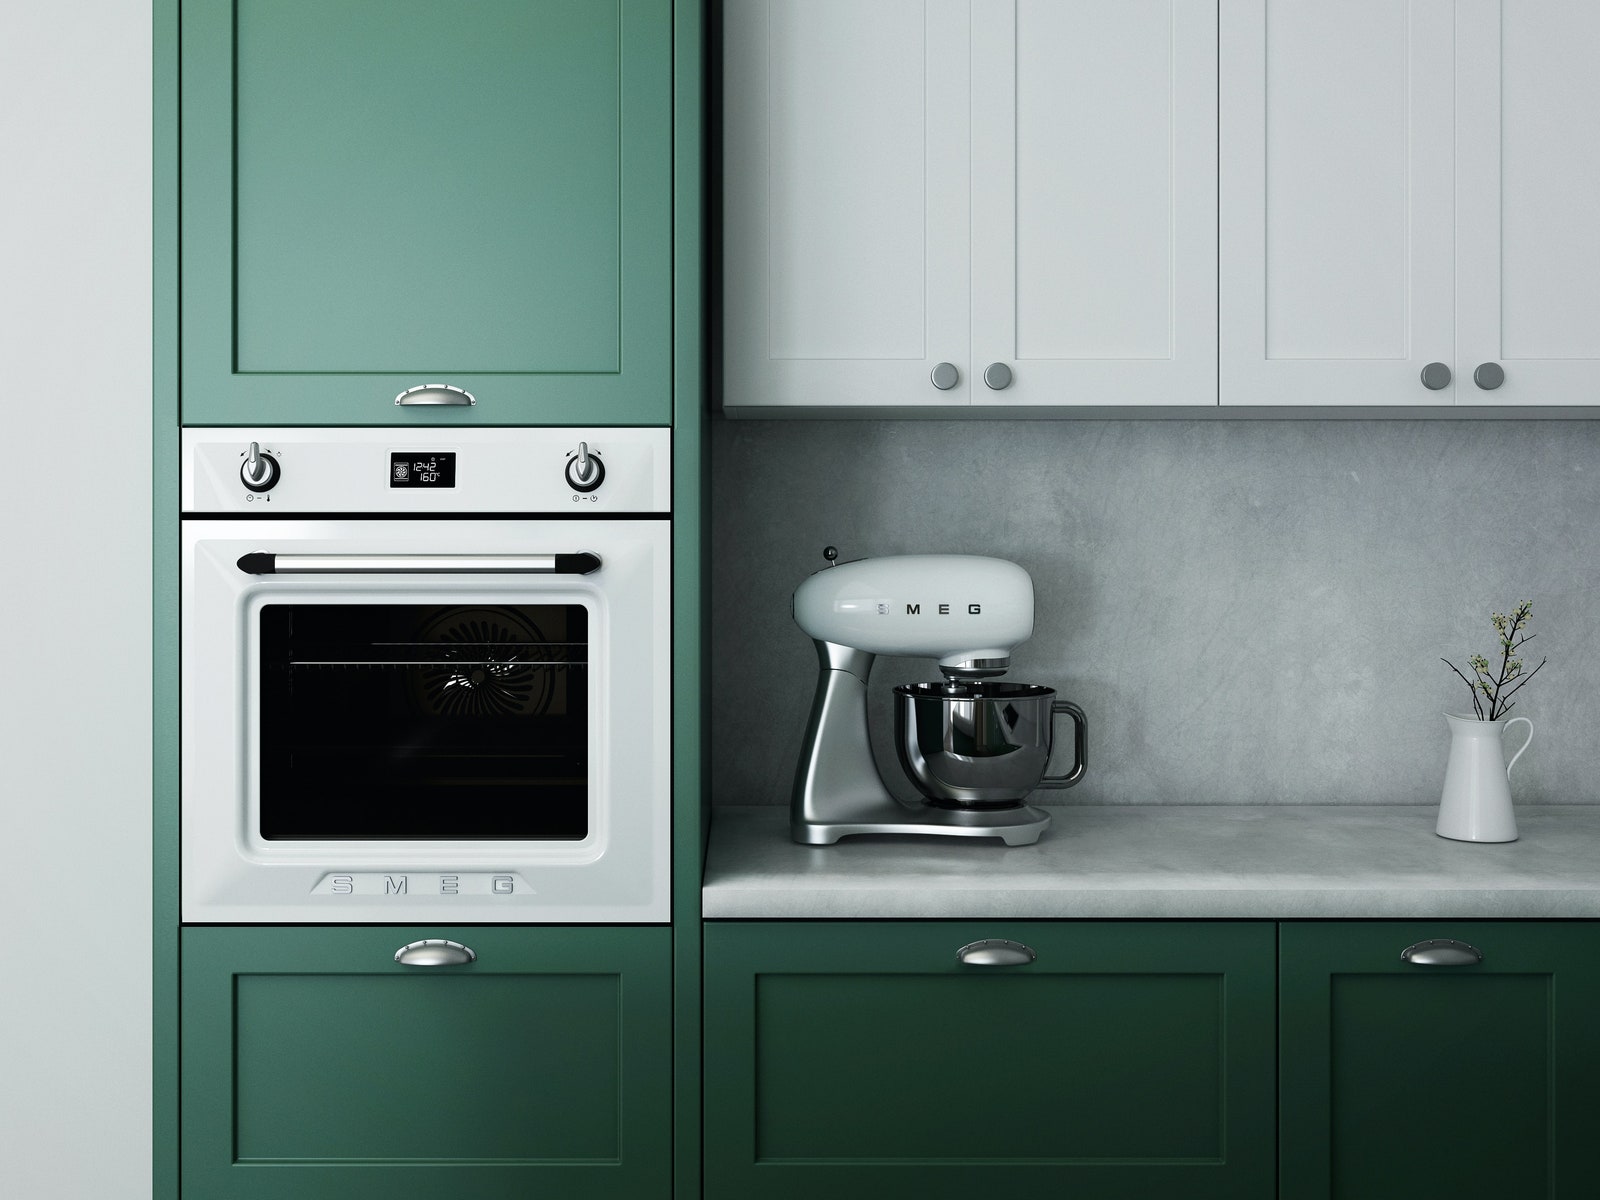 Learn how to clean an oven with baking soda like the one in this gorgeous green kitchen.